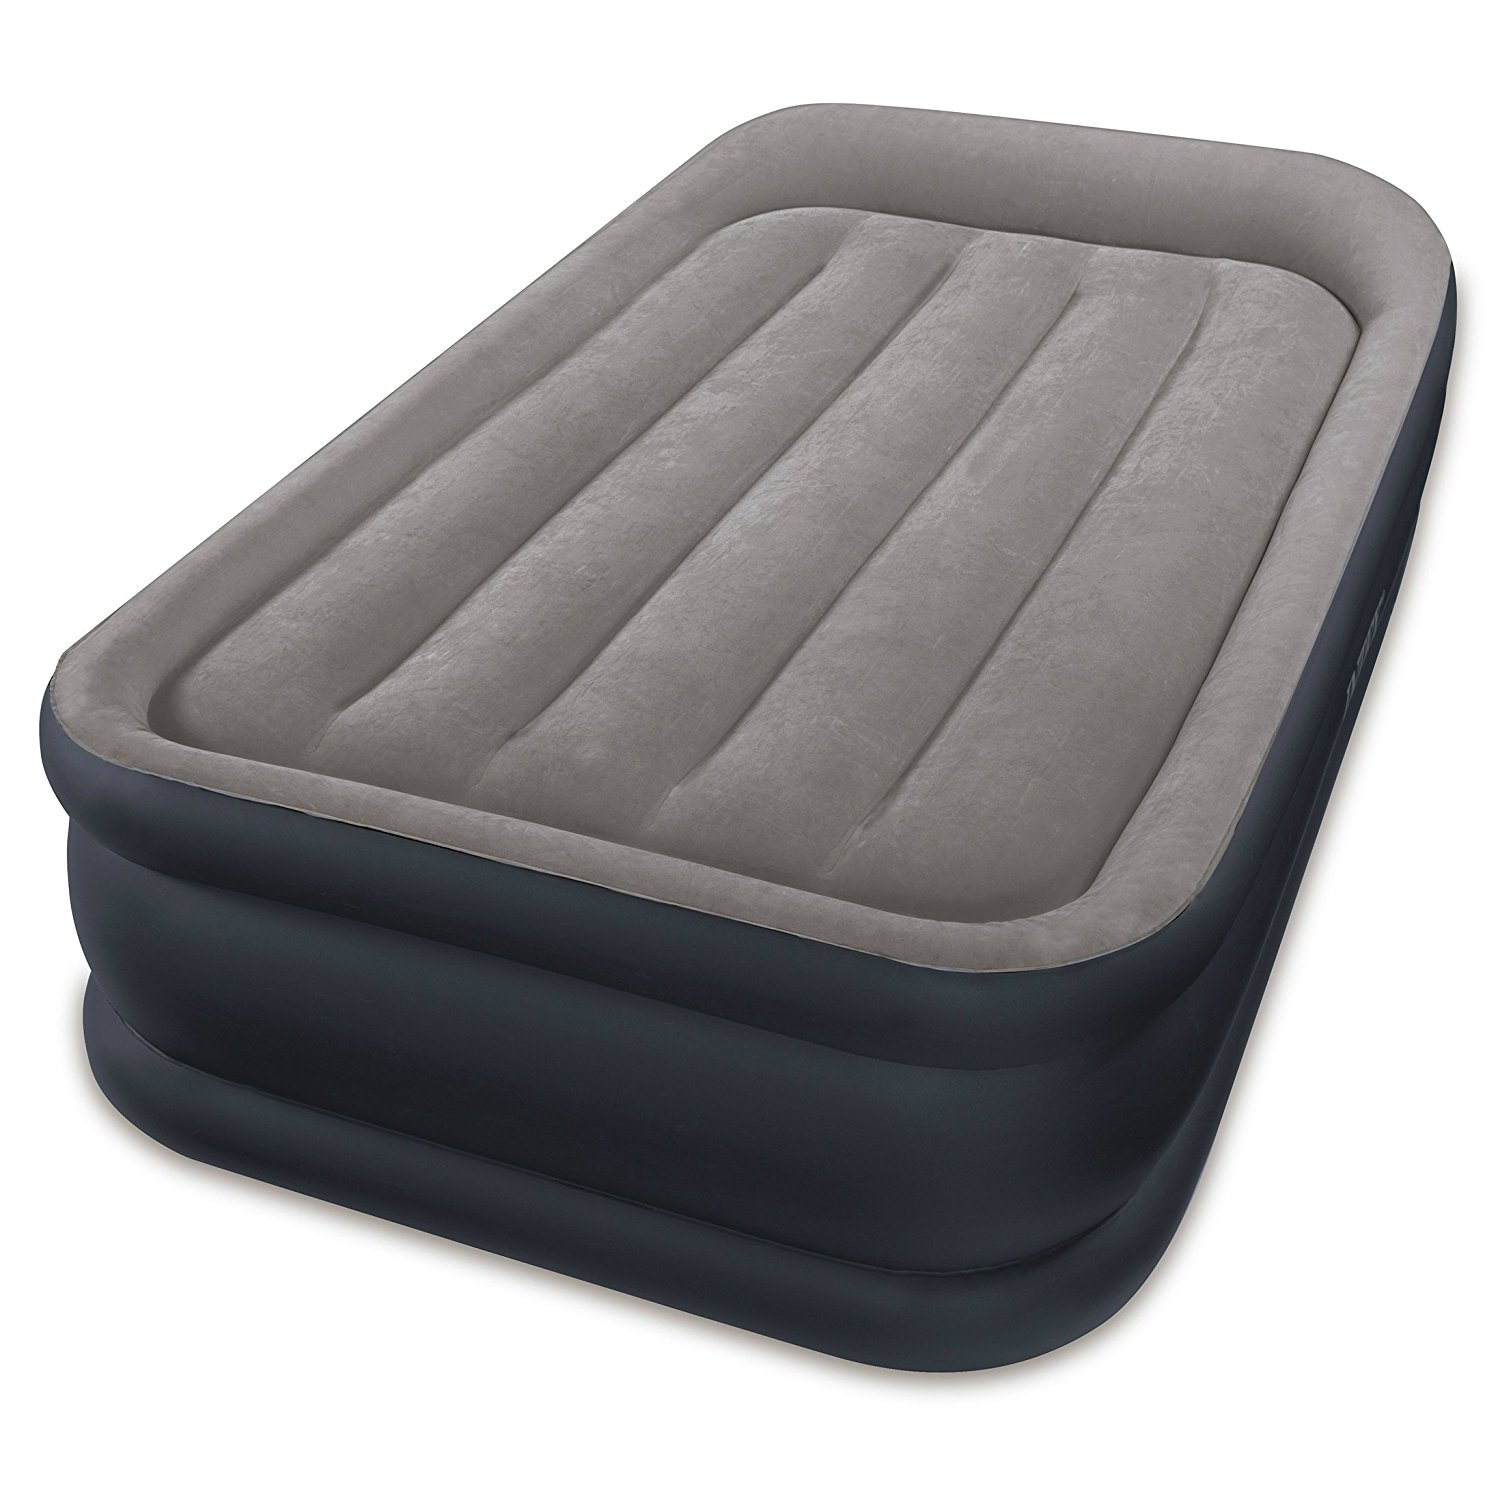 Intex Dura-Beam Standard Airbed Only $27.99 on Amazon!